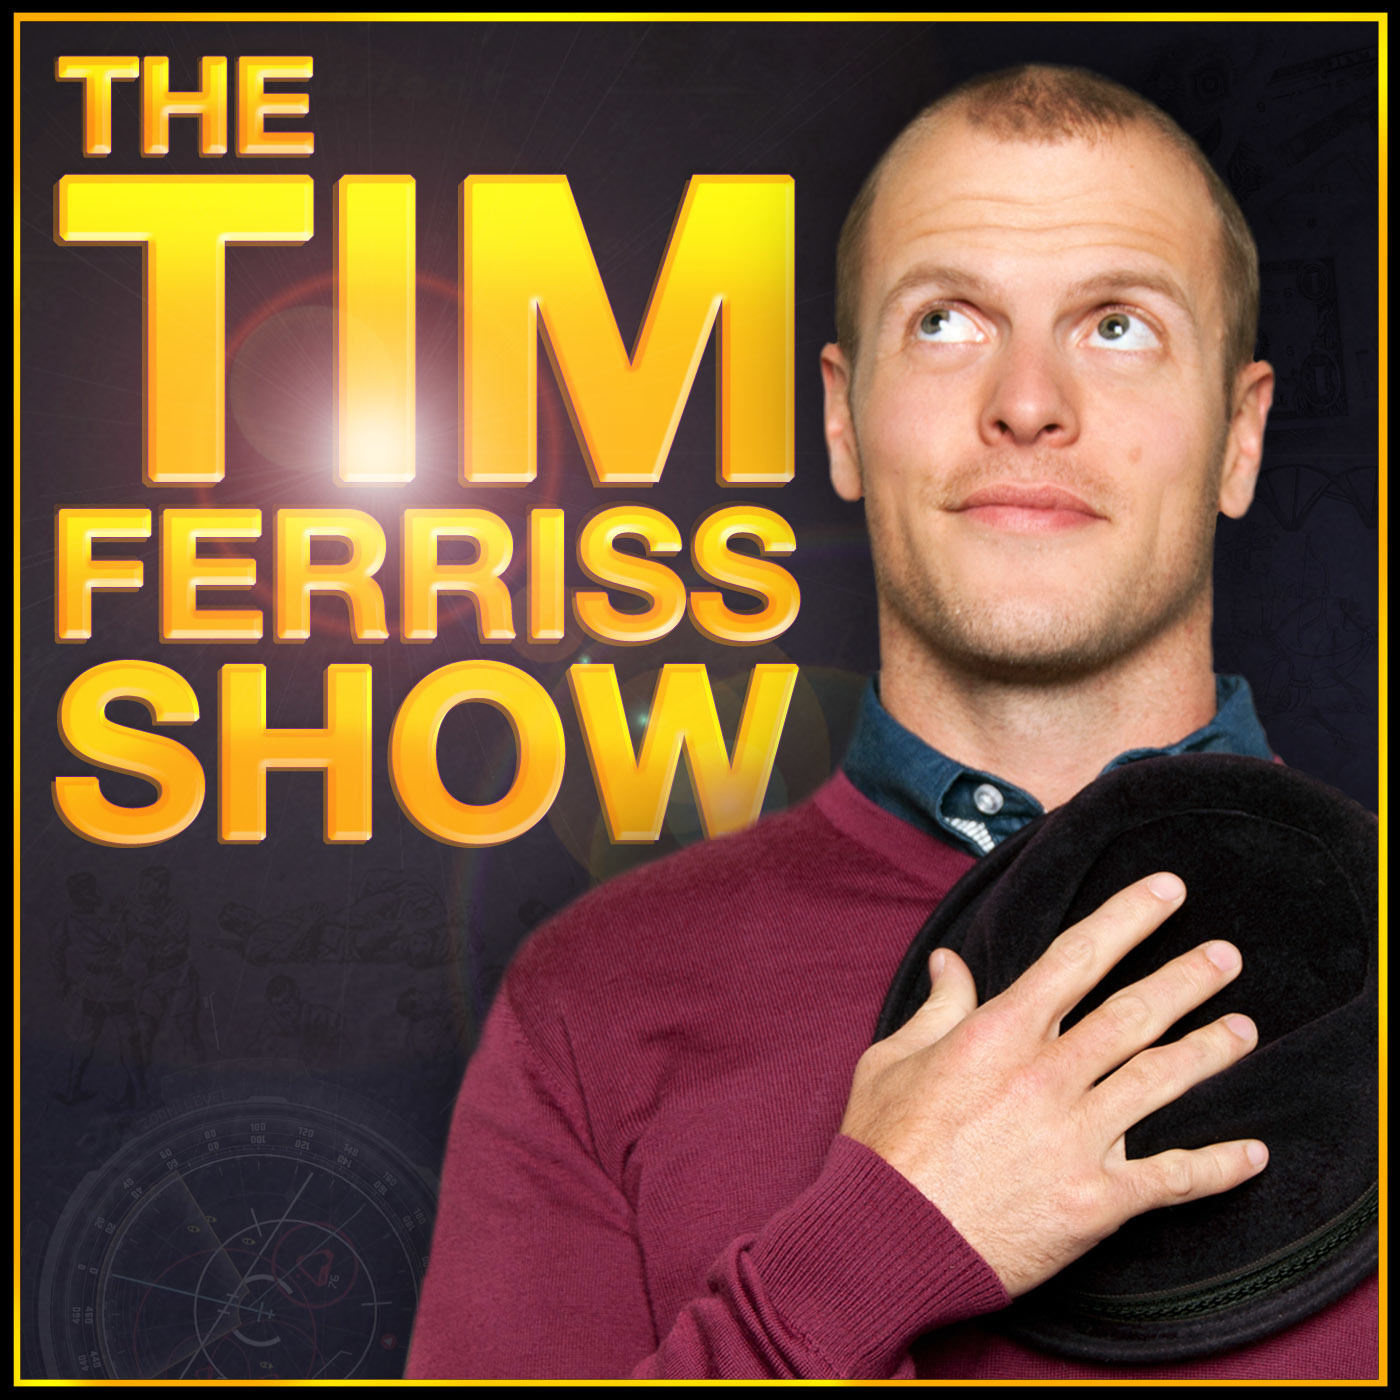 If Tim Ferriss Launched a Utility NFT, What Value Would He Provide Holders?